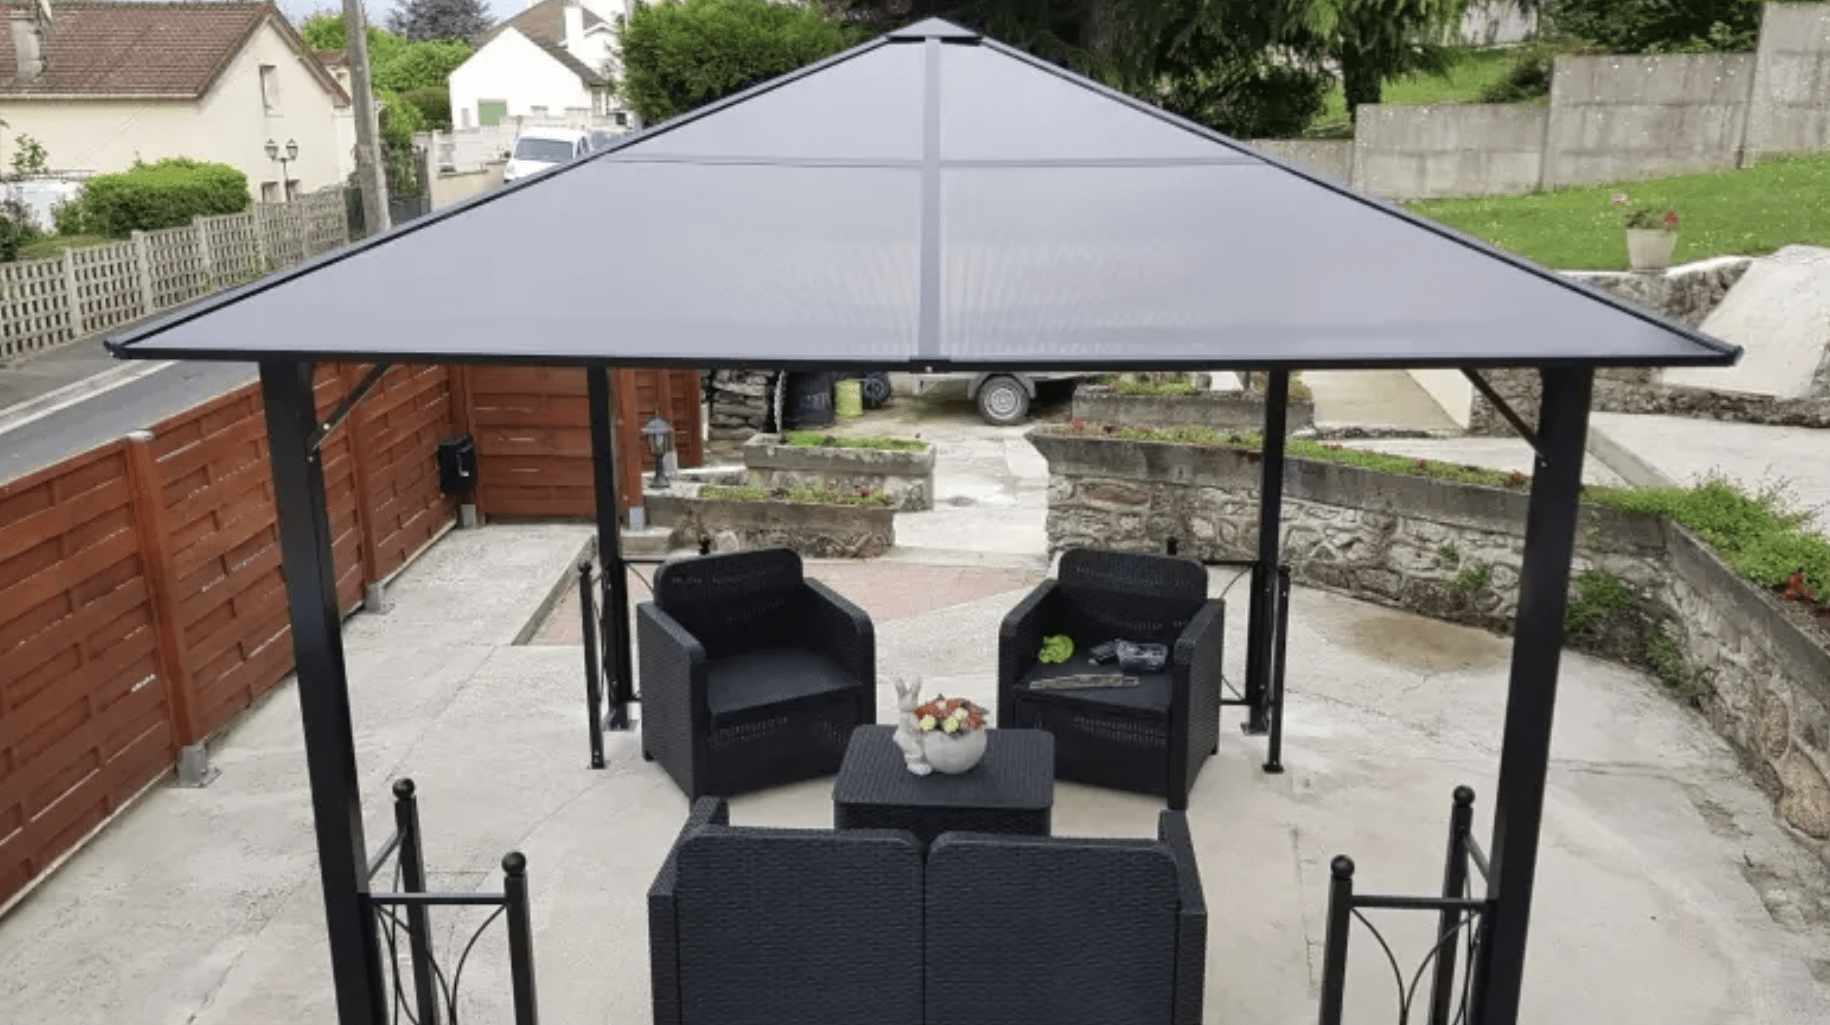 Black Hardtop Gazebo Canopy with Polycarbonate Roof - Trade Warehouse